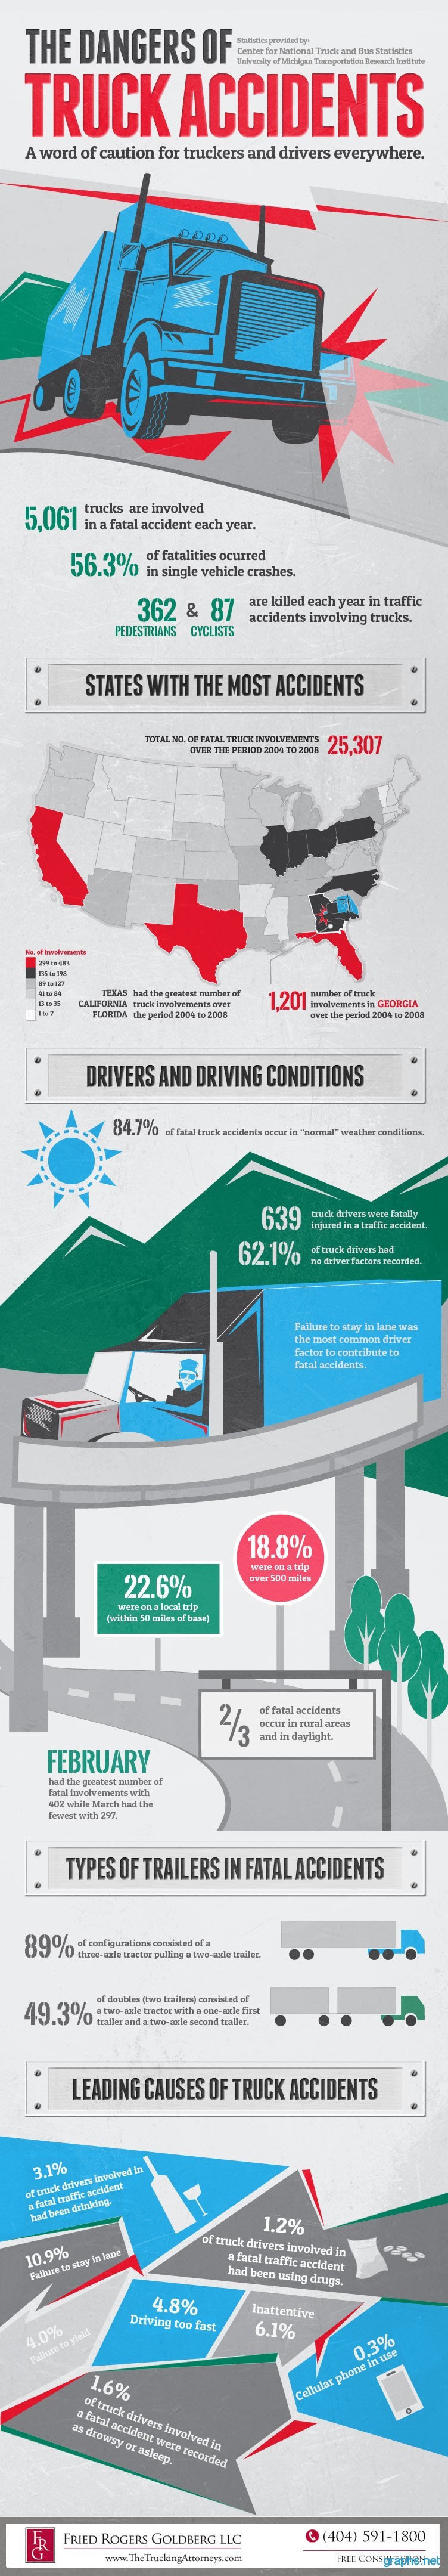 facts about truck accidents